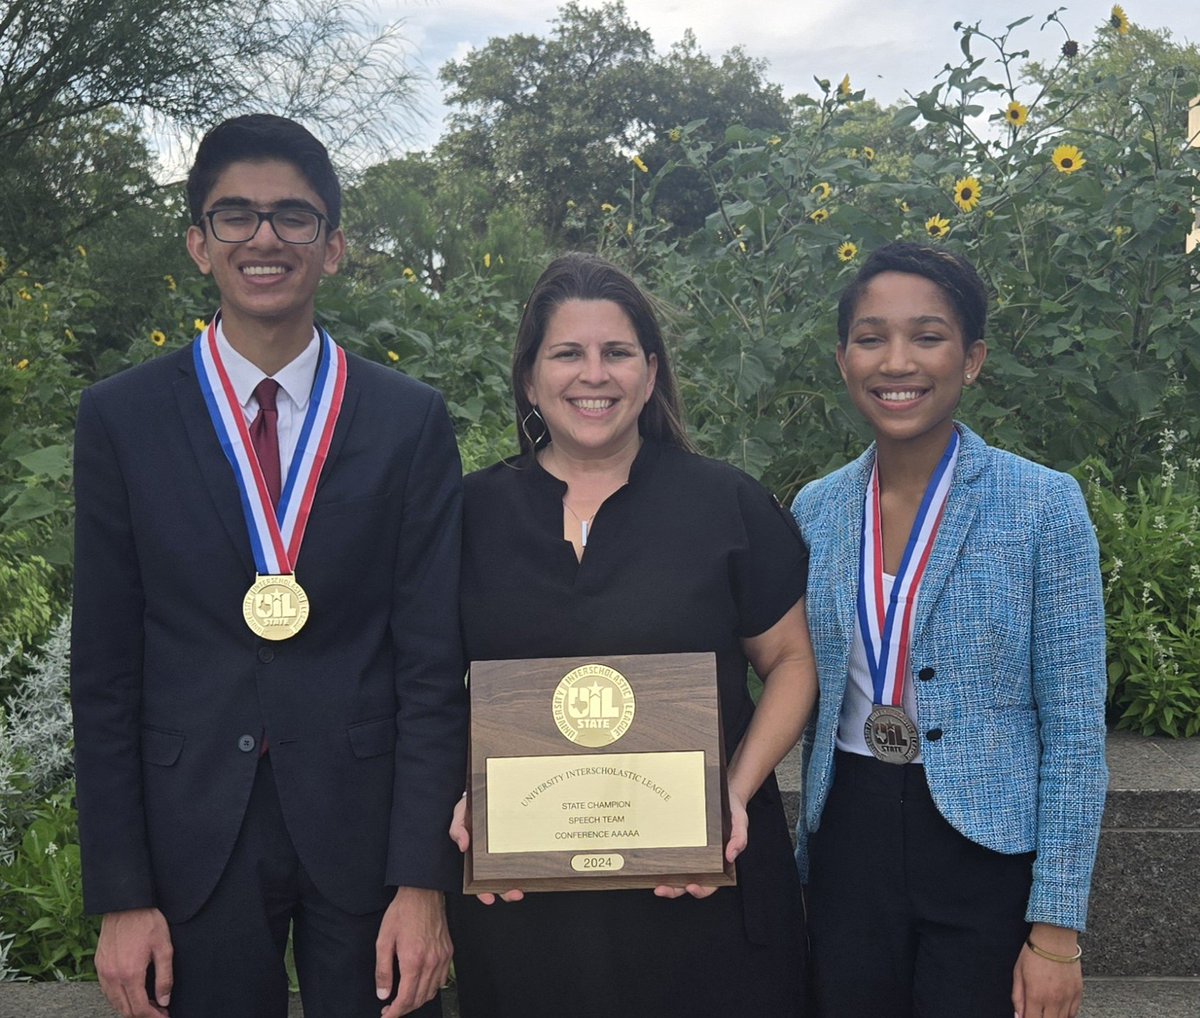 Great day to be a Hawk! Waleed Haider - State Champion in Persuasive Maya Hay - State silver medalist in Informative Hendrickson - UIL 5A State Champion Speech Team!!!! @pfisd @HawkNationHHS